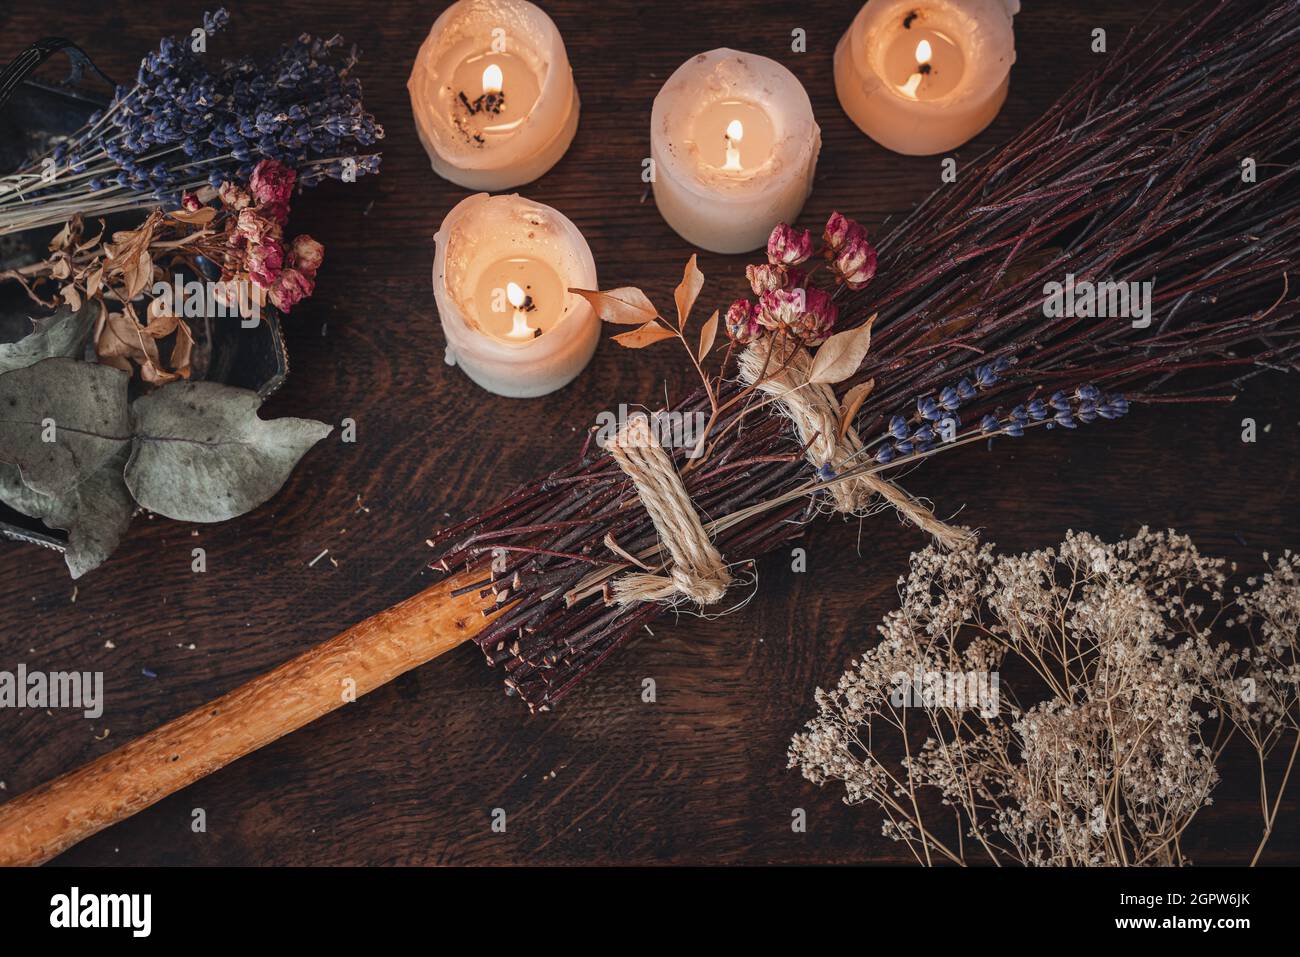 Decorated DIY besom broom for Samhain celebration. Hand made broom on a dark wooden table Stock Photo